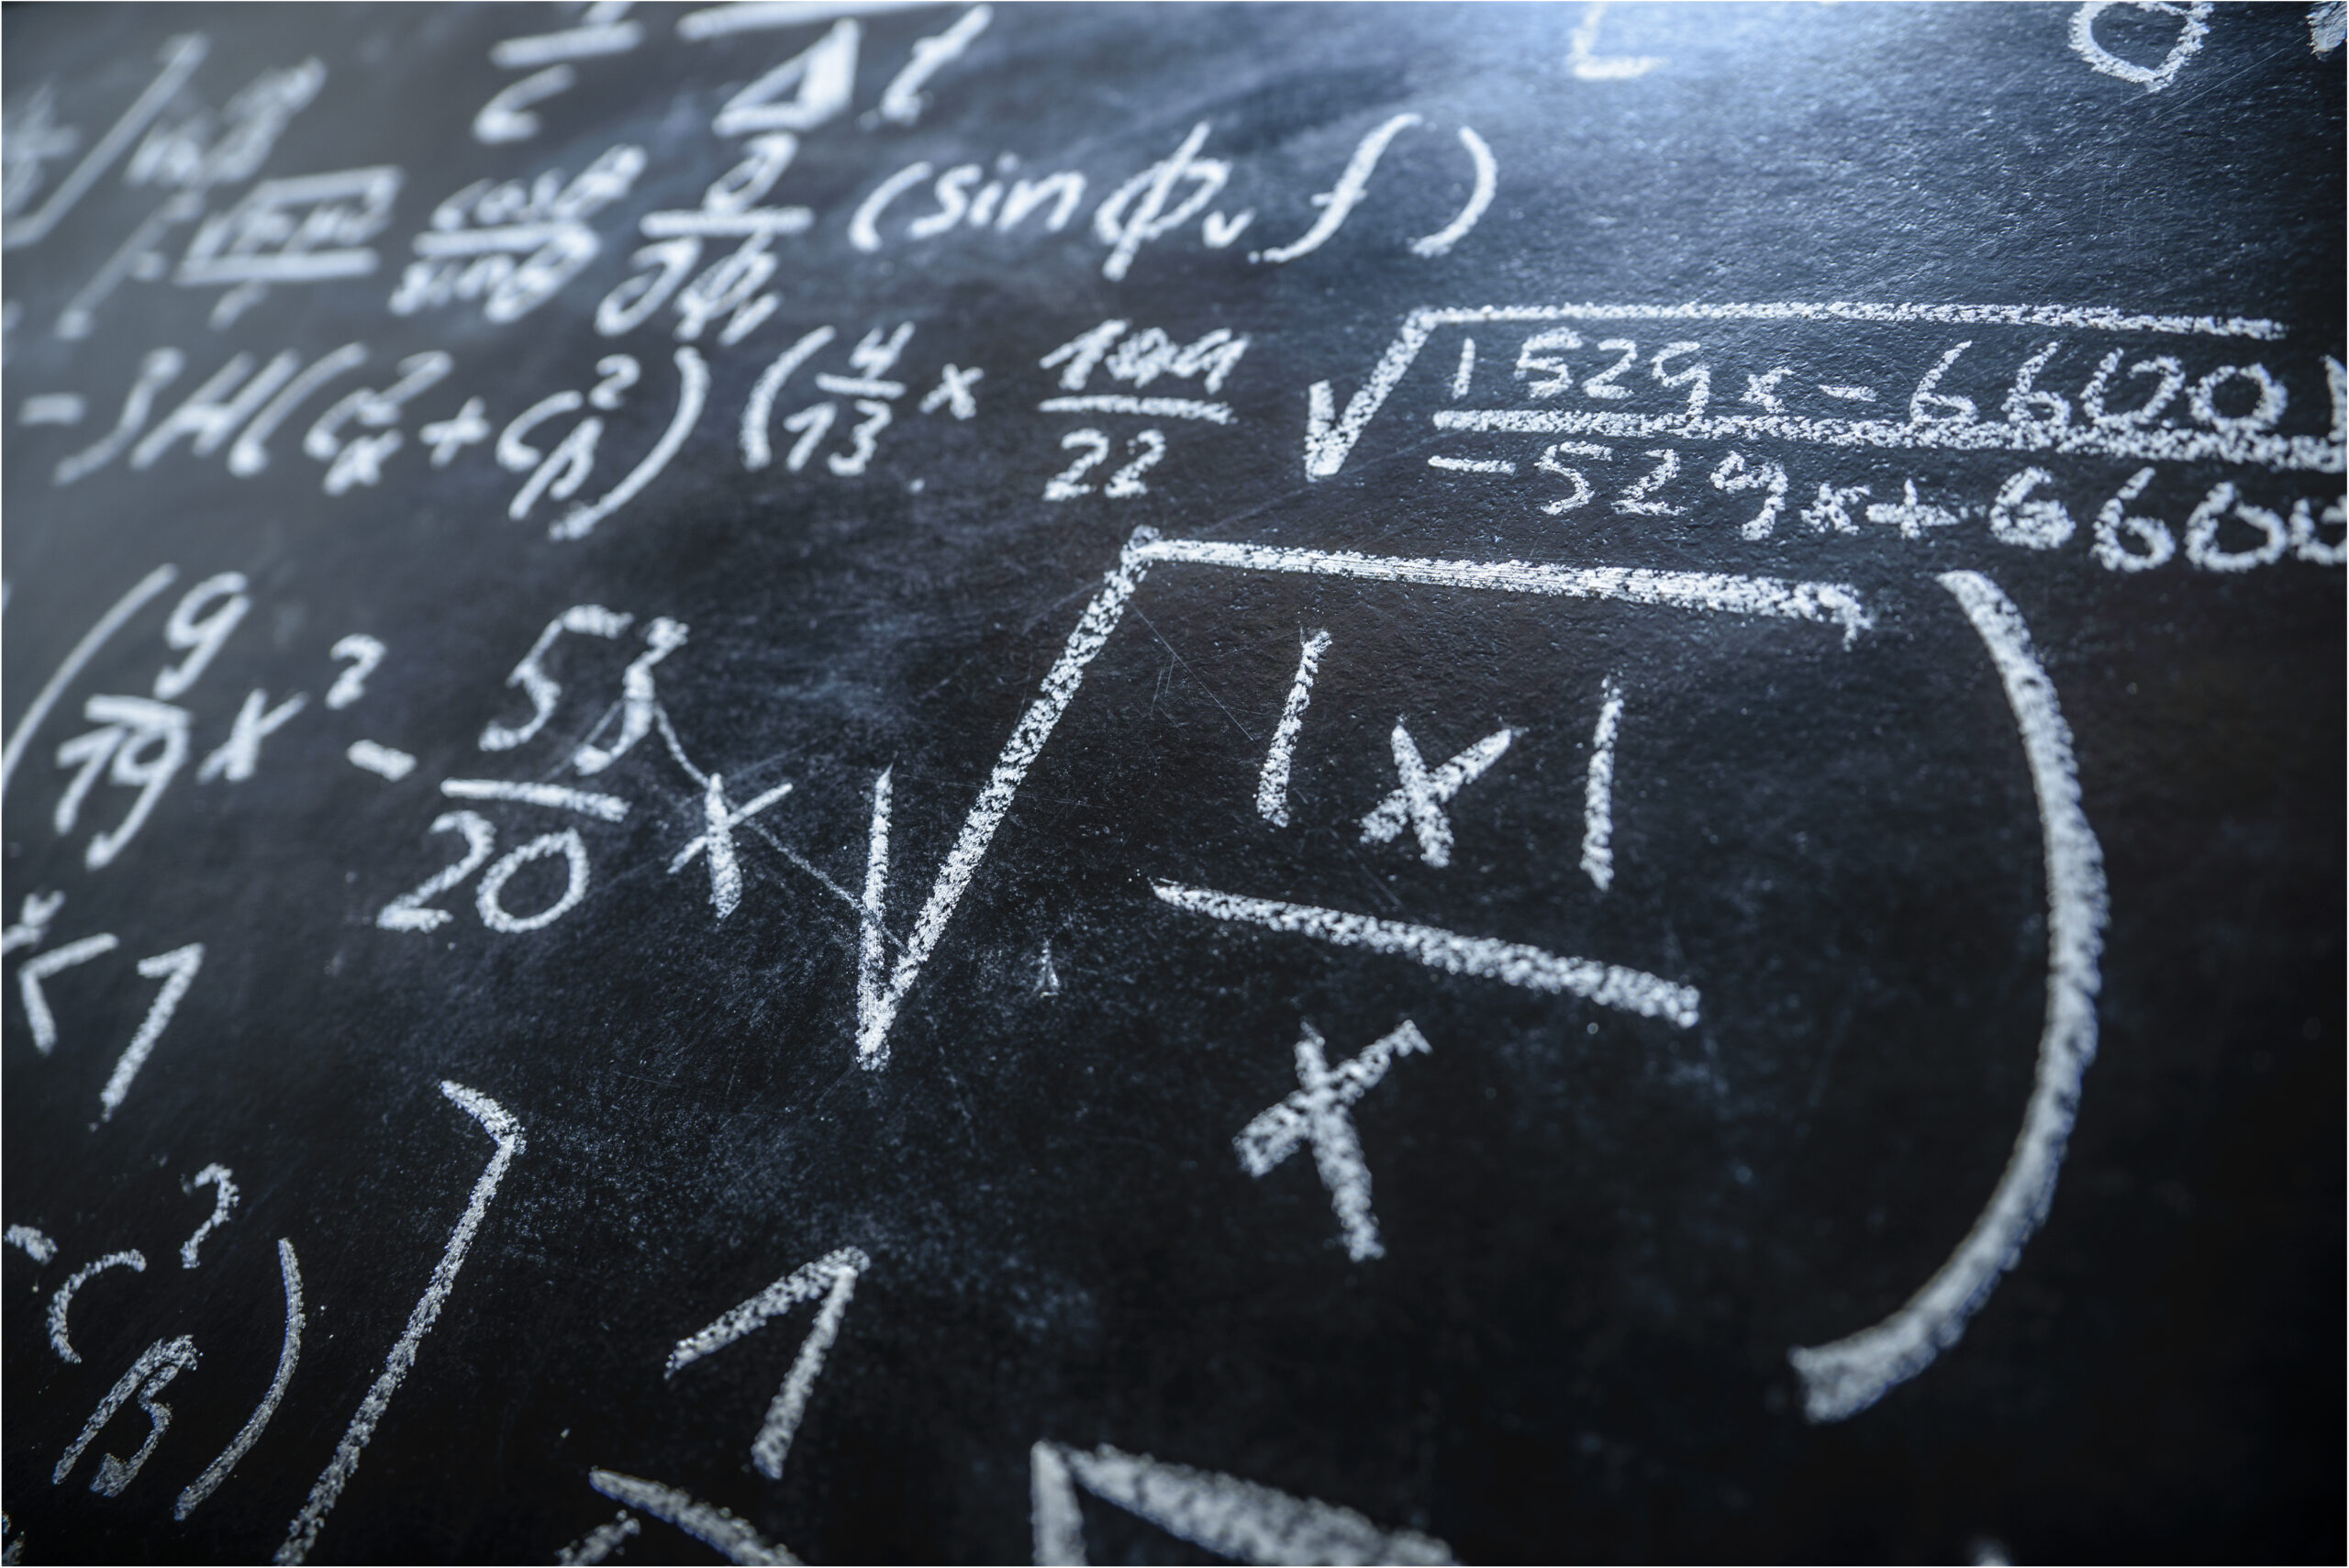 Mathematical equations seen drawn with chalk on a blackboard.